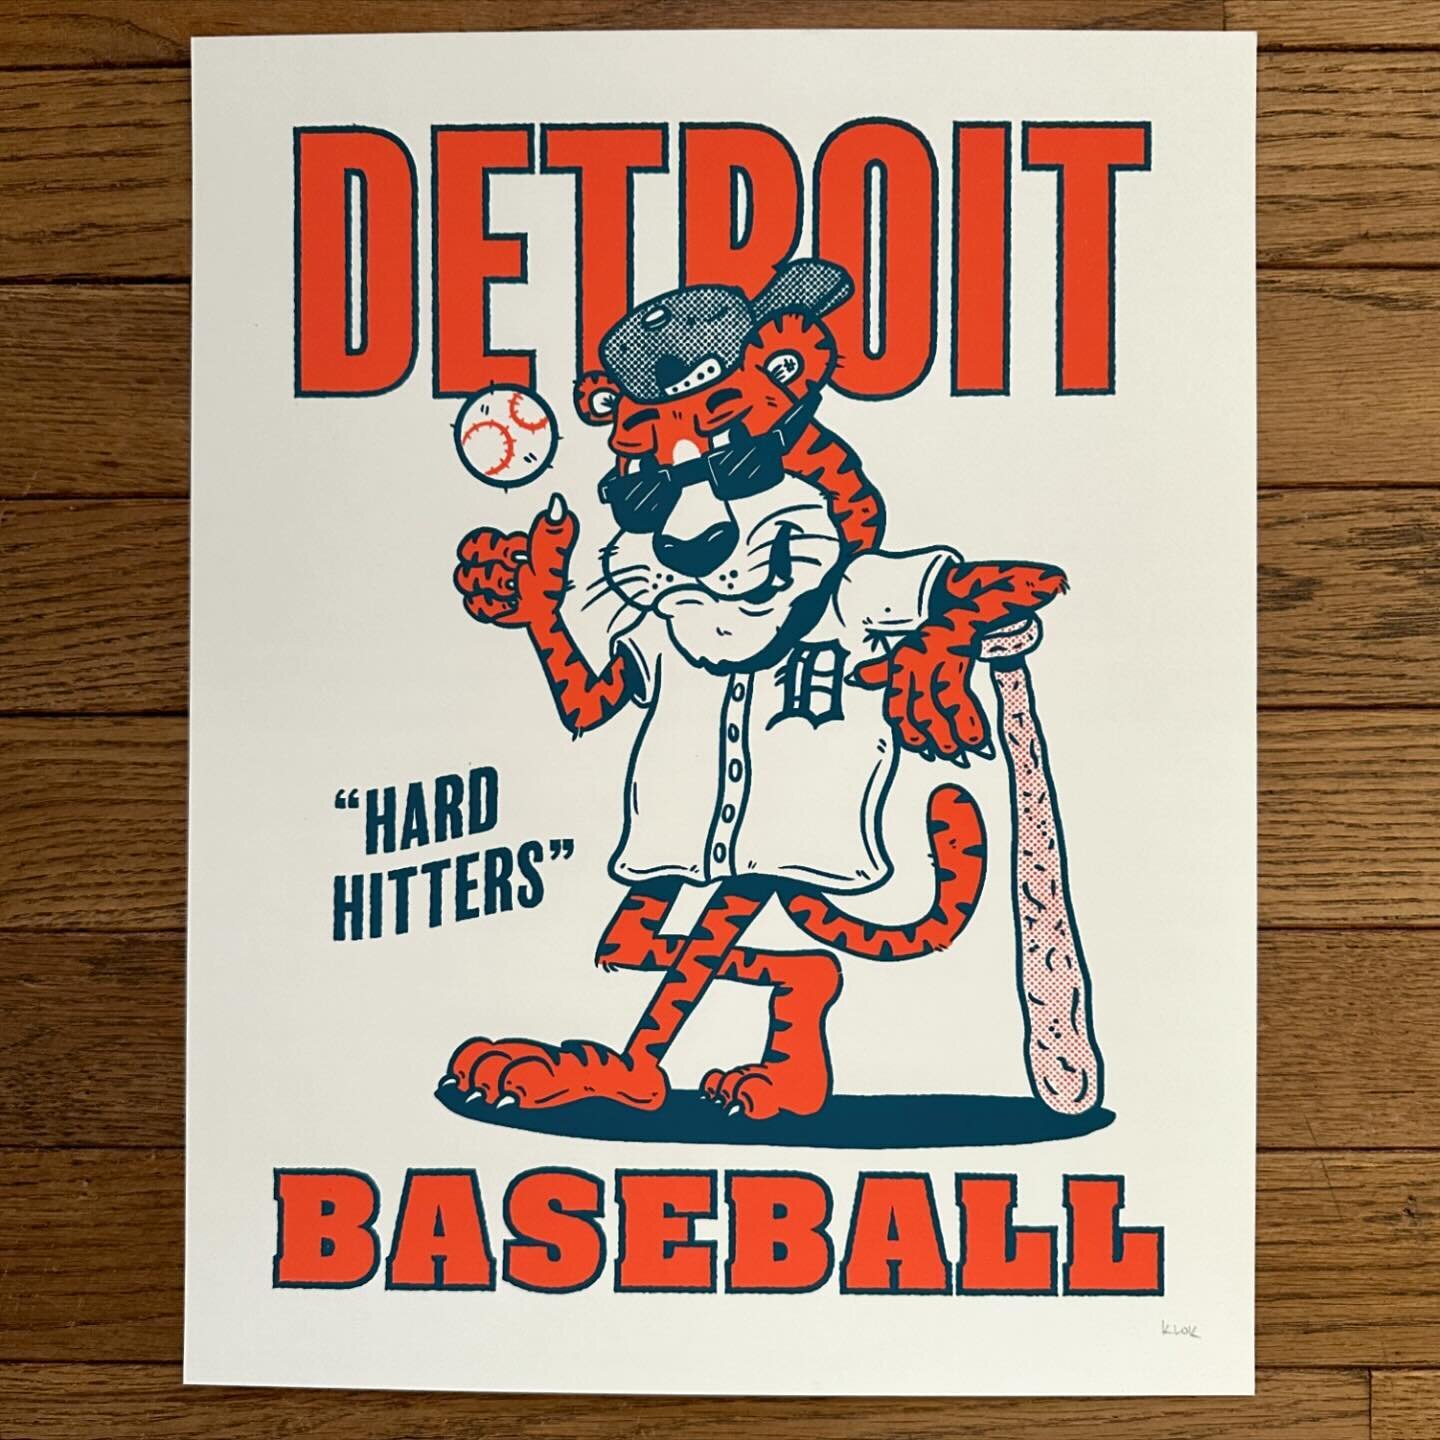 IT&rsquo;S OPENING DAY IN DETROIT! April in the D is one of the best times of the year, so let&rsquo;s do a little sale to celebrate! Use code &ldquo;OPENINGDAY&rdquo; for 15% off all prints!
.
.
.
.
.
#detroit #detroittigers #openingday #baseball #m